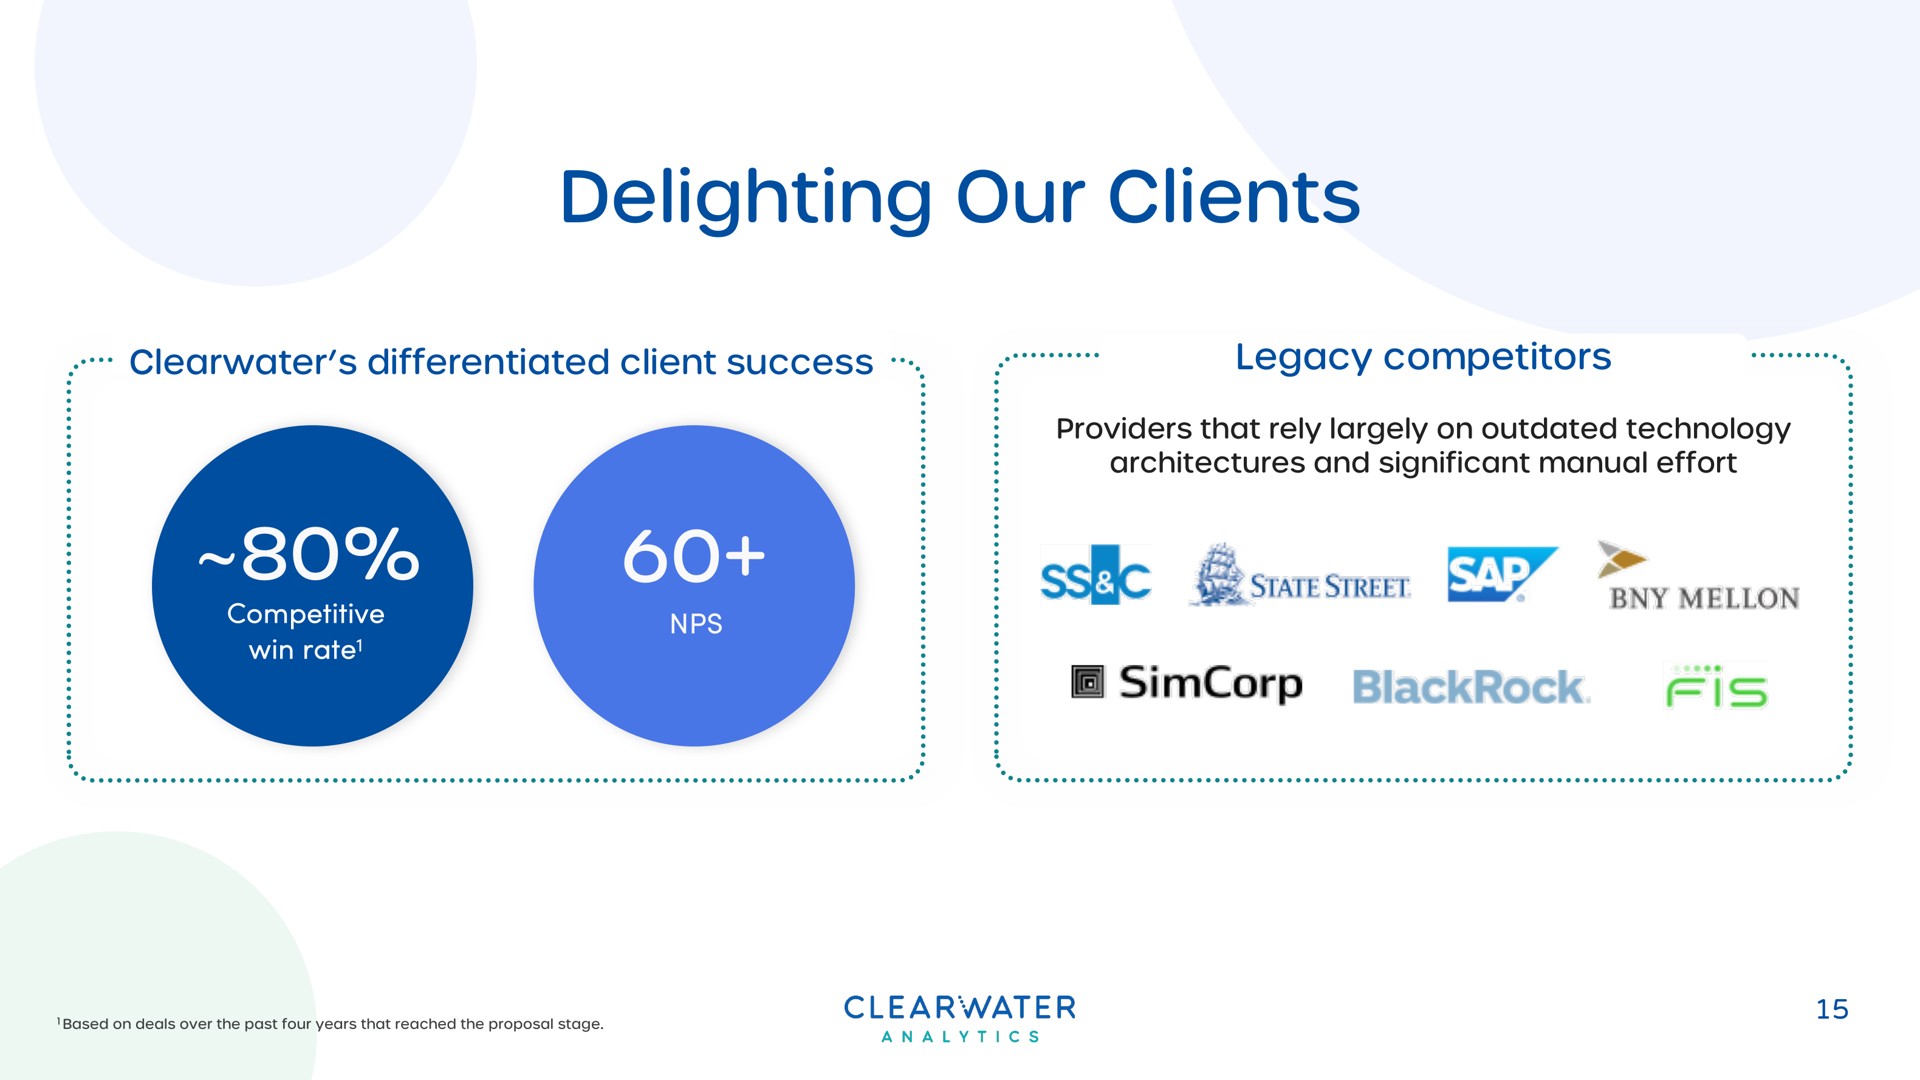 delighting our clients ais bye | Clearwater Analytics